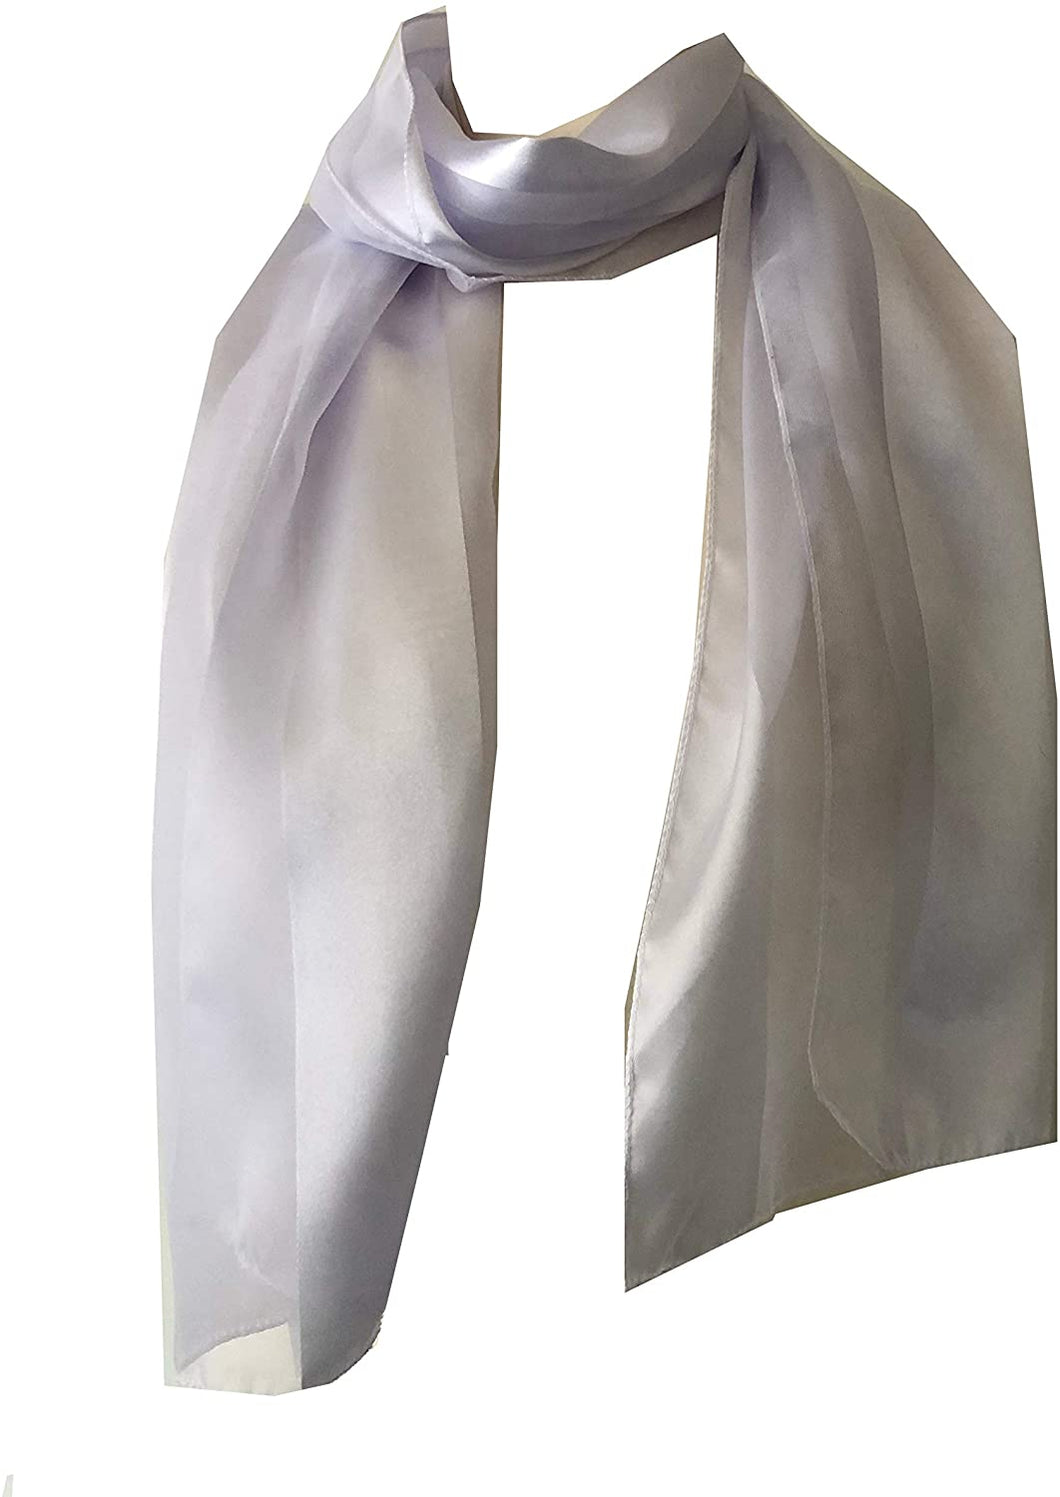 Plain White Faux Chiffon and Satin Style Striped Scarf Thin Pretty Scarf Great for Any Outfit Lovely Gift